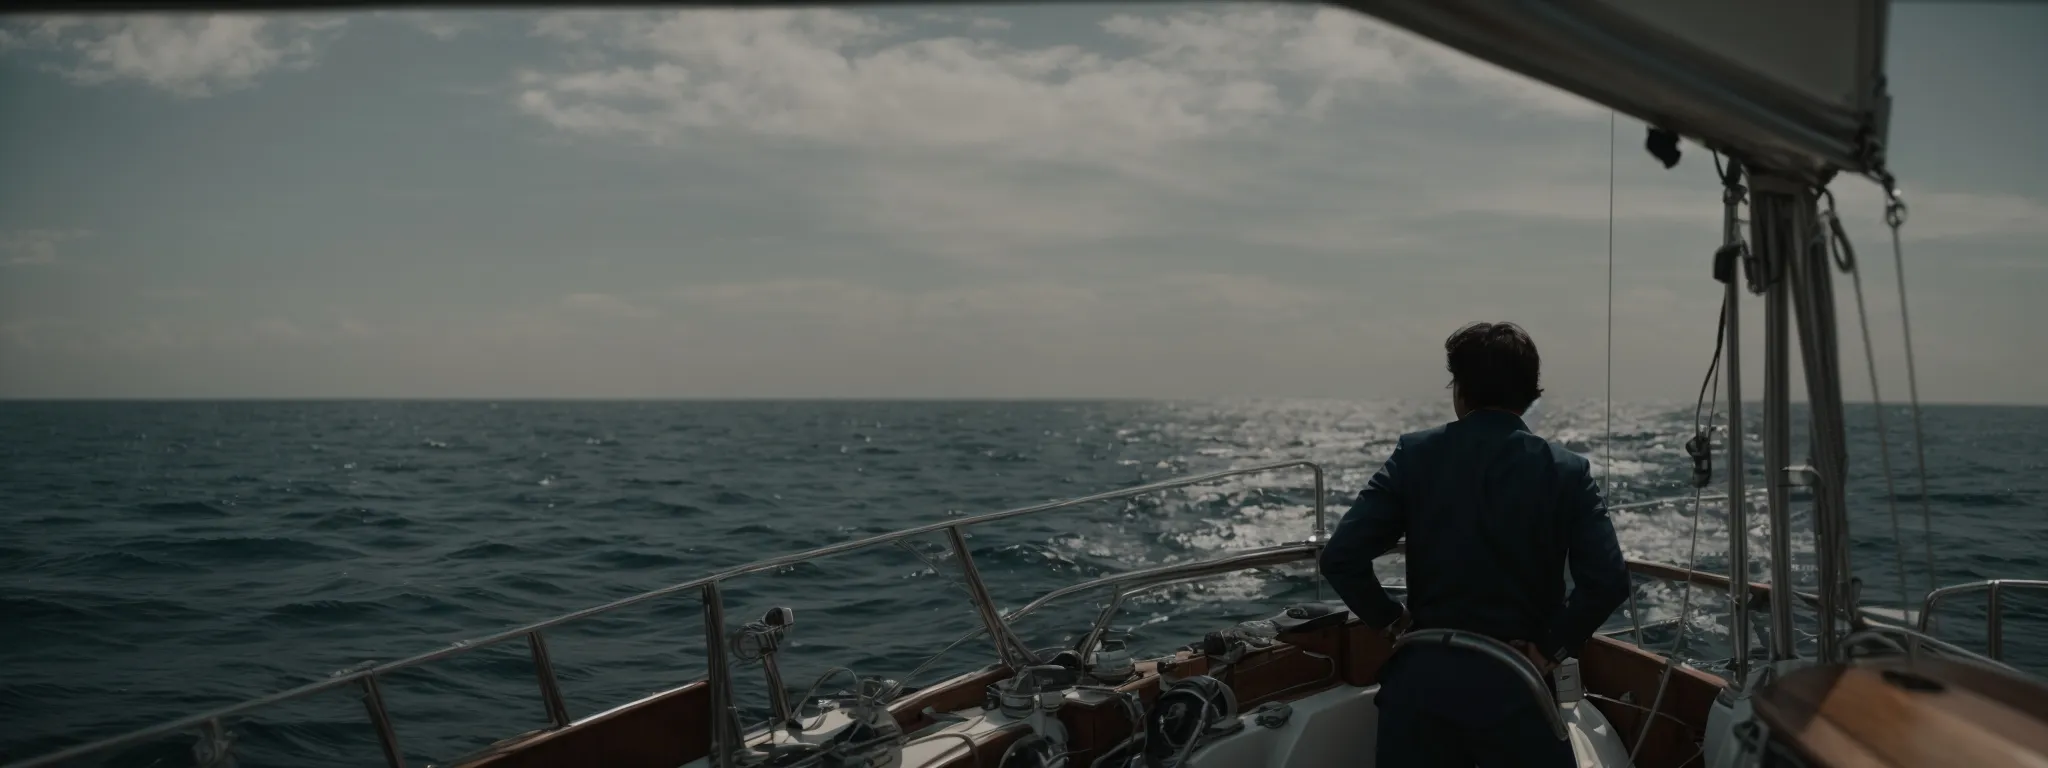 a person stands at the helm of a sailboat, steering confidently across a vast, open sea towards the horizon.